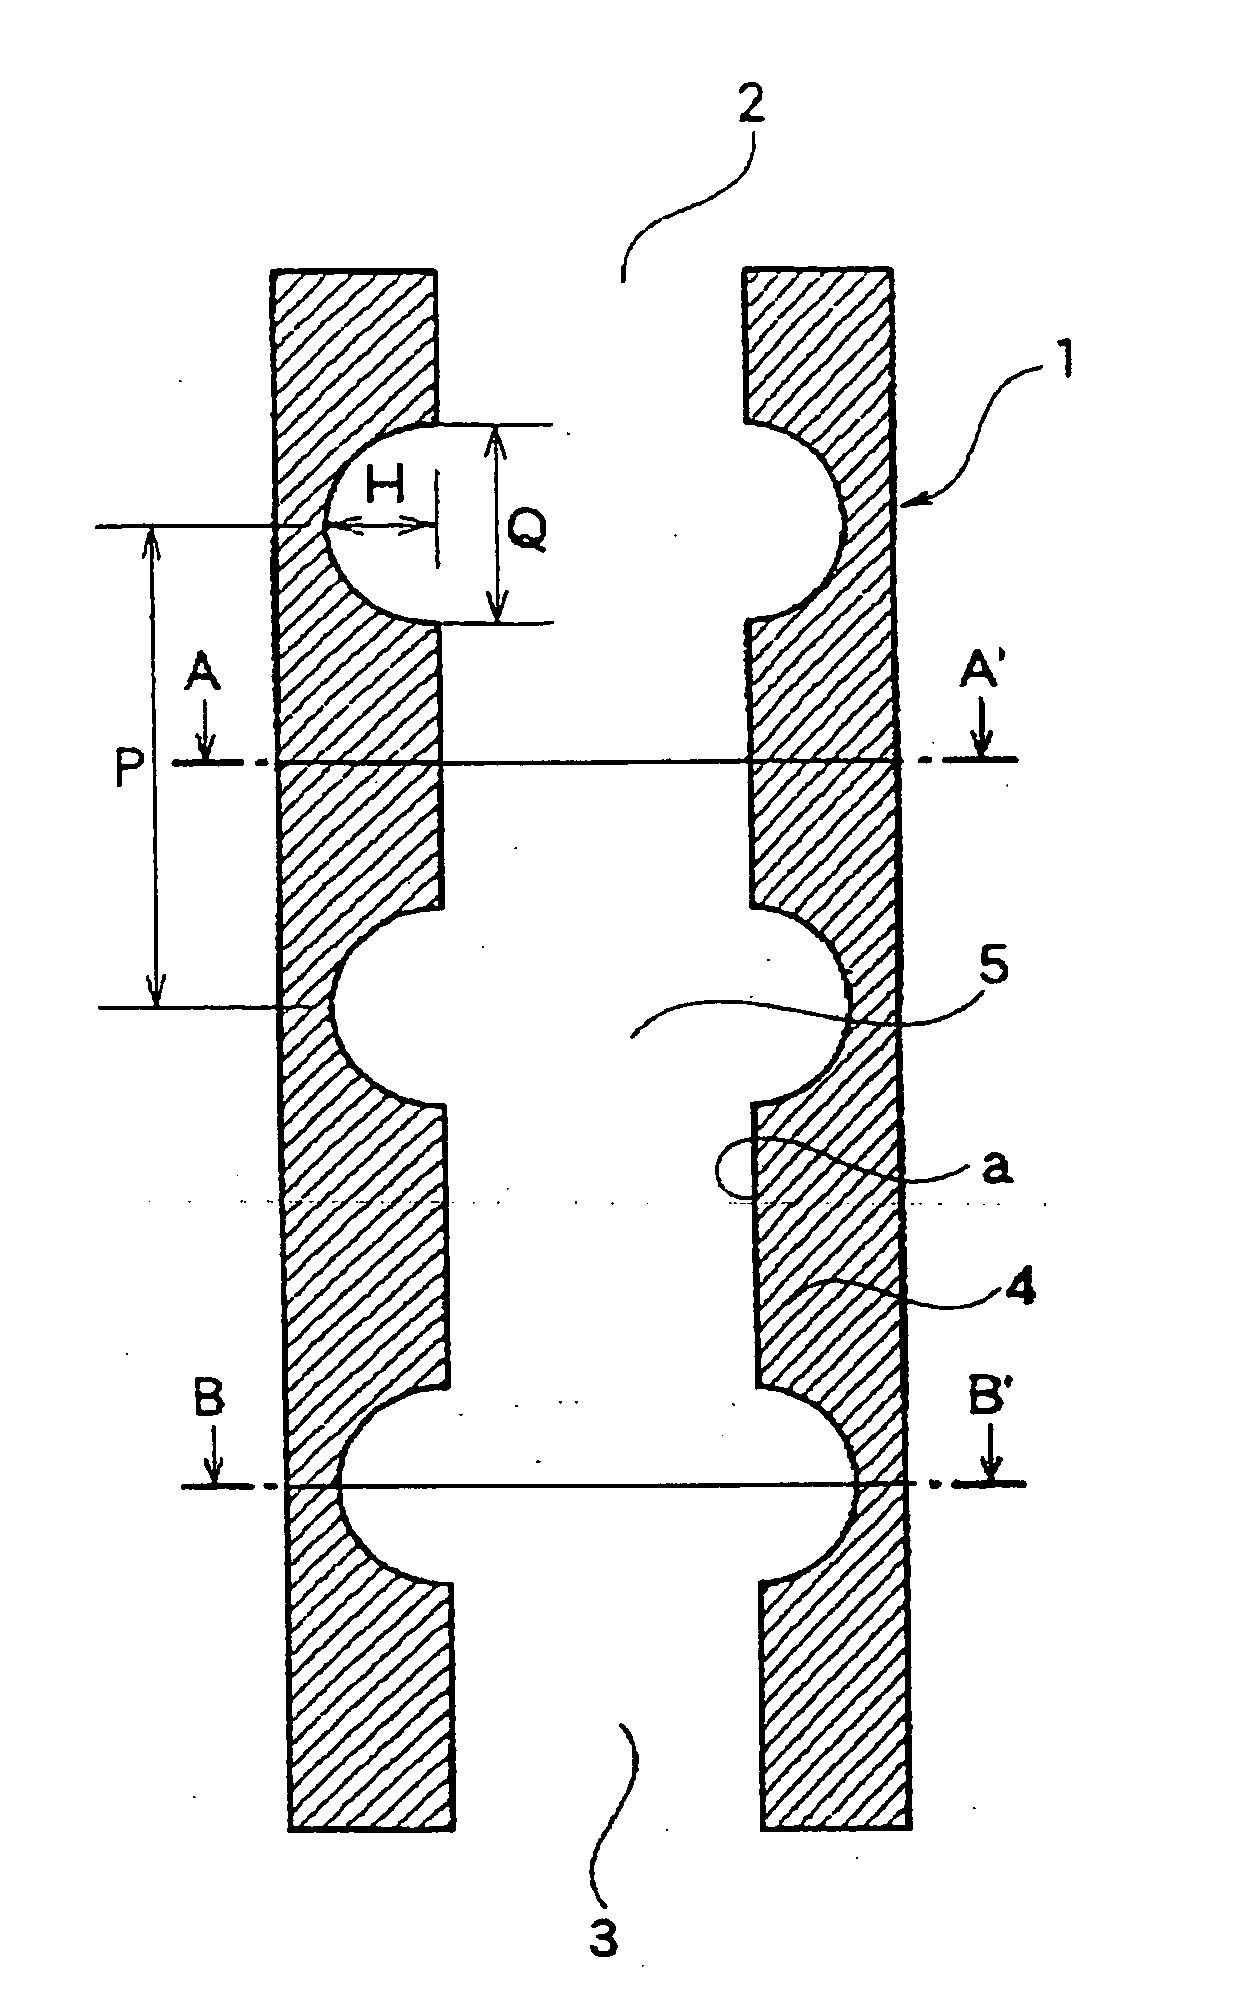 Tubular reaction vessel and process for producing silicon therewith